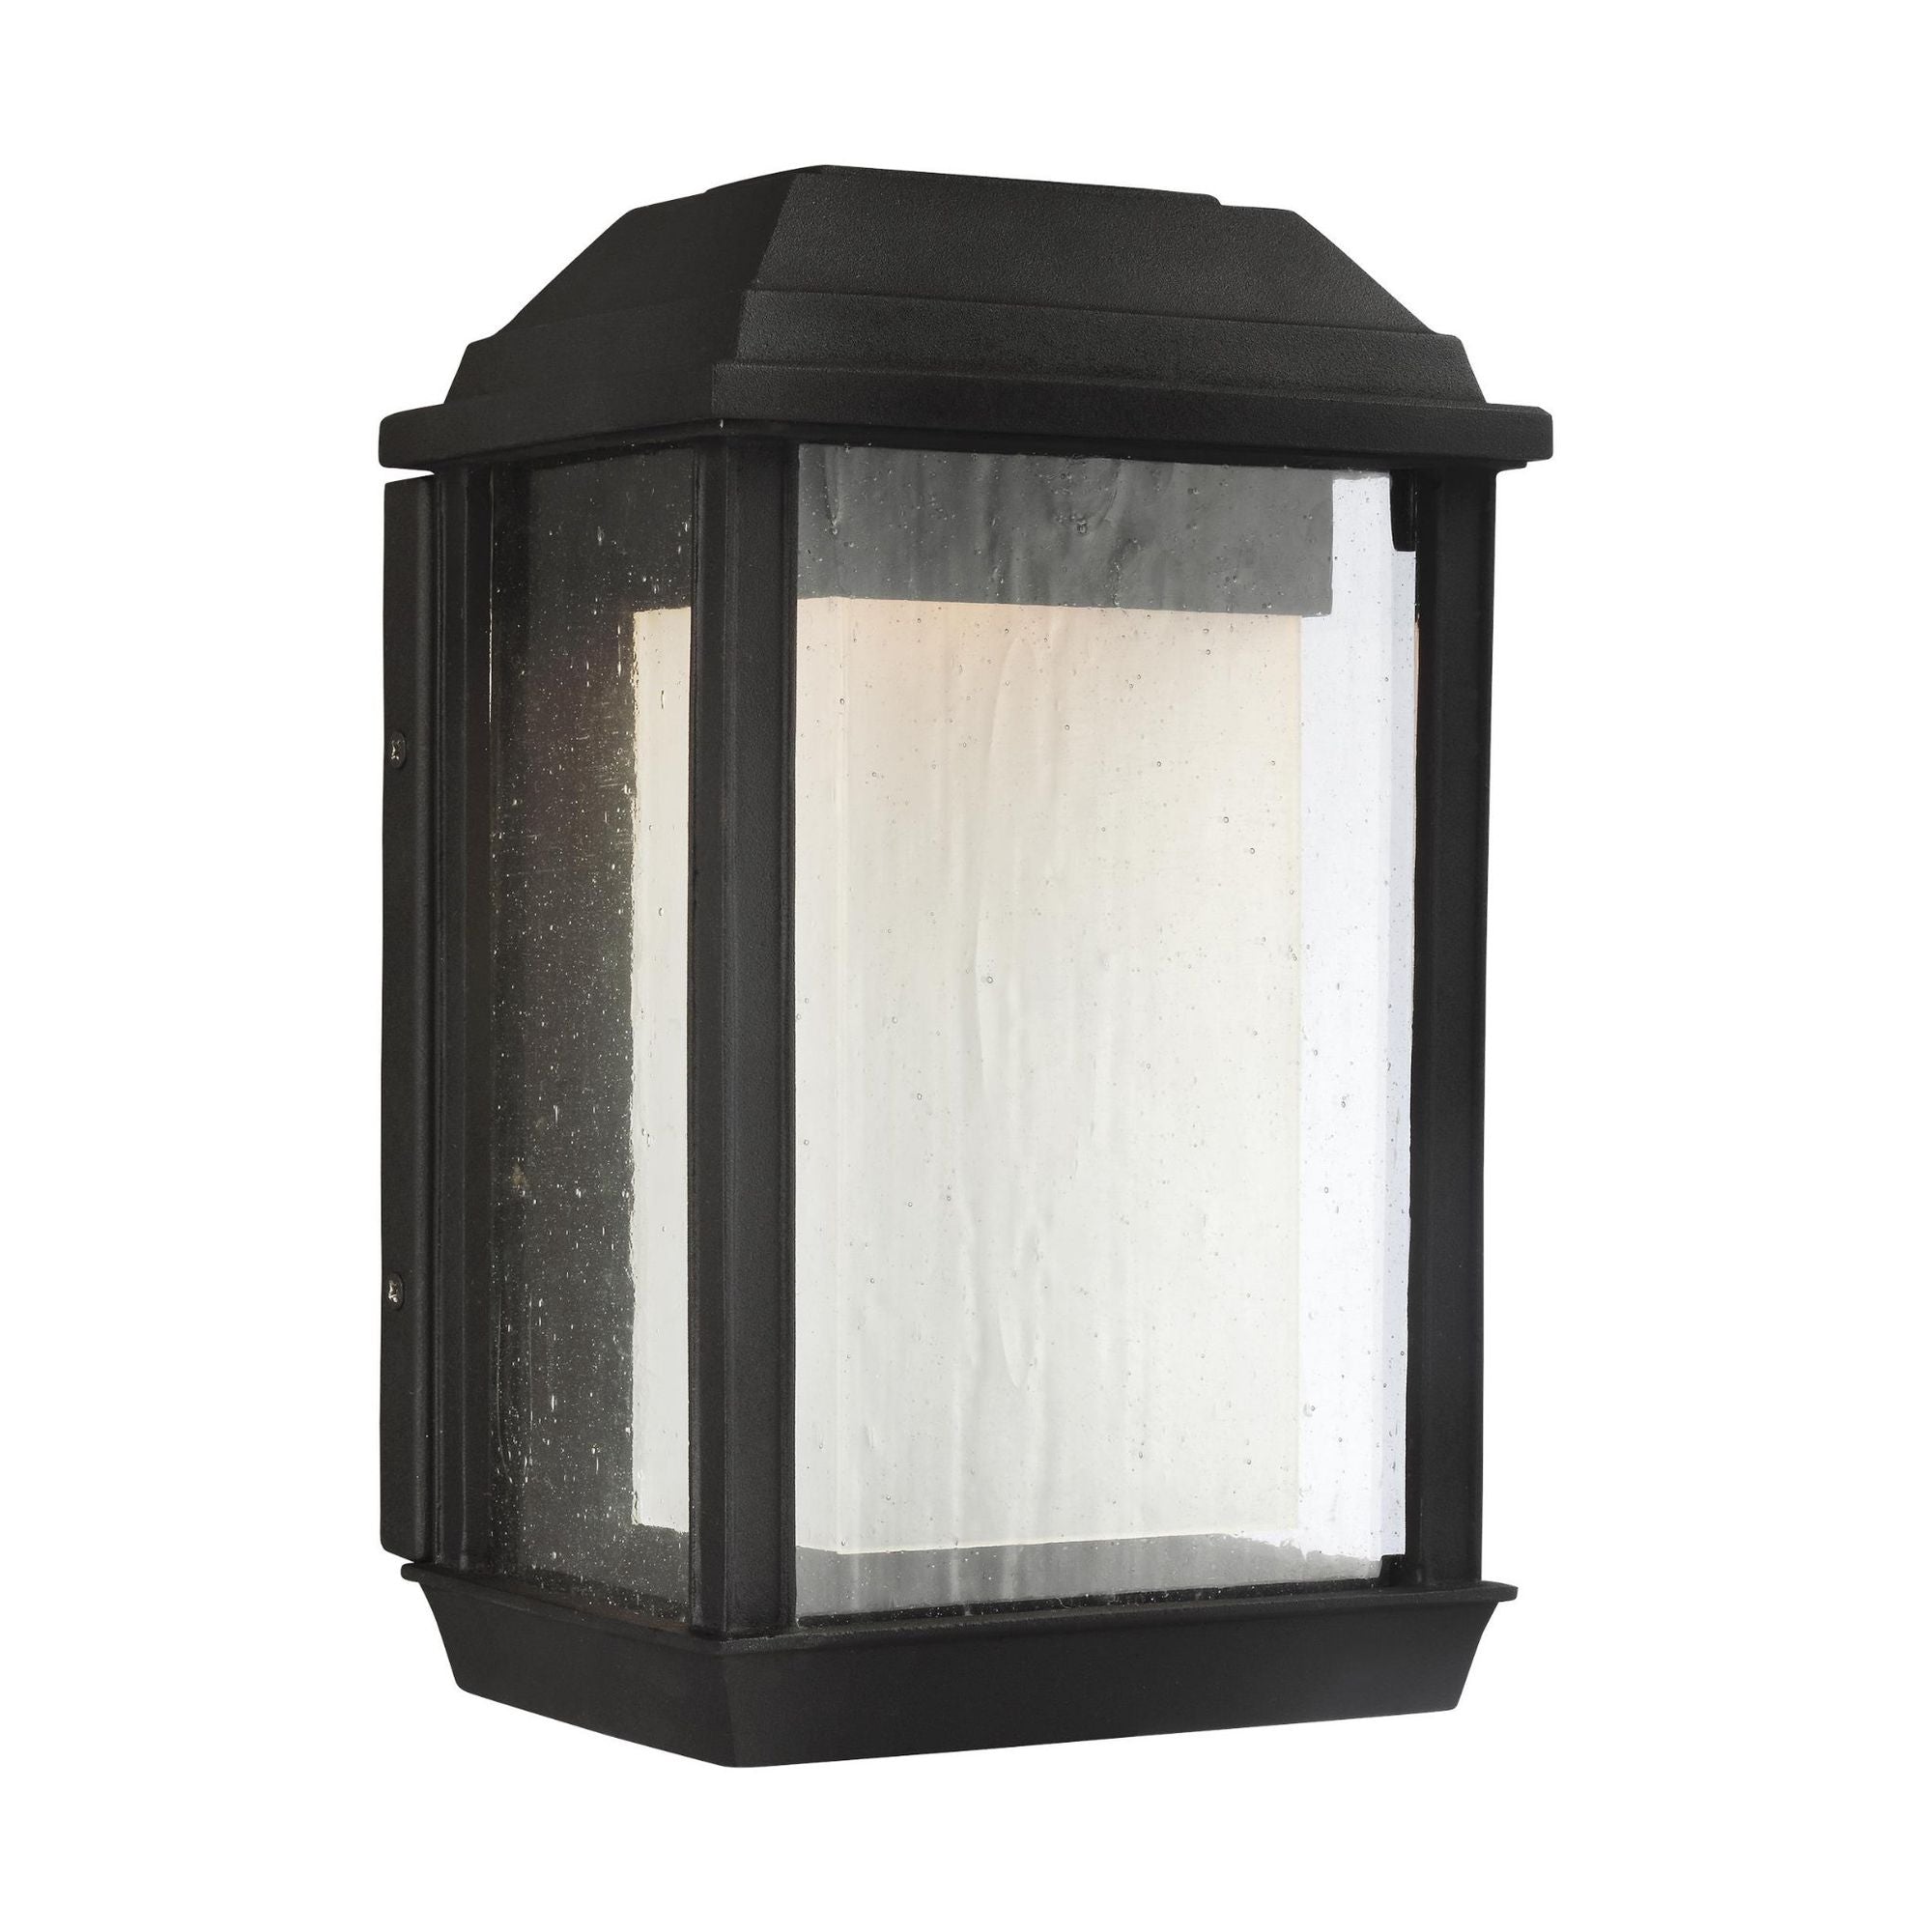 Sean Lavin McHenry Small LED Lantern in Textured Black